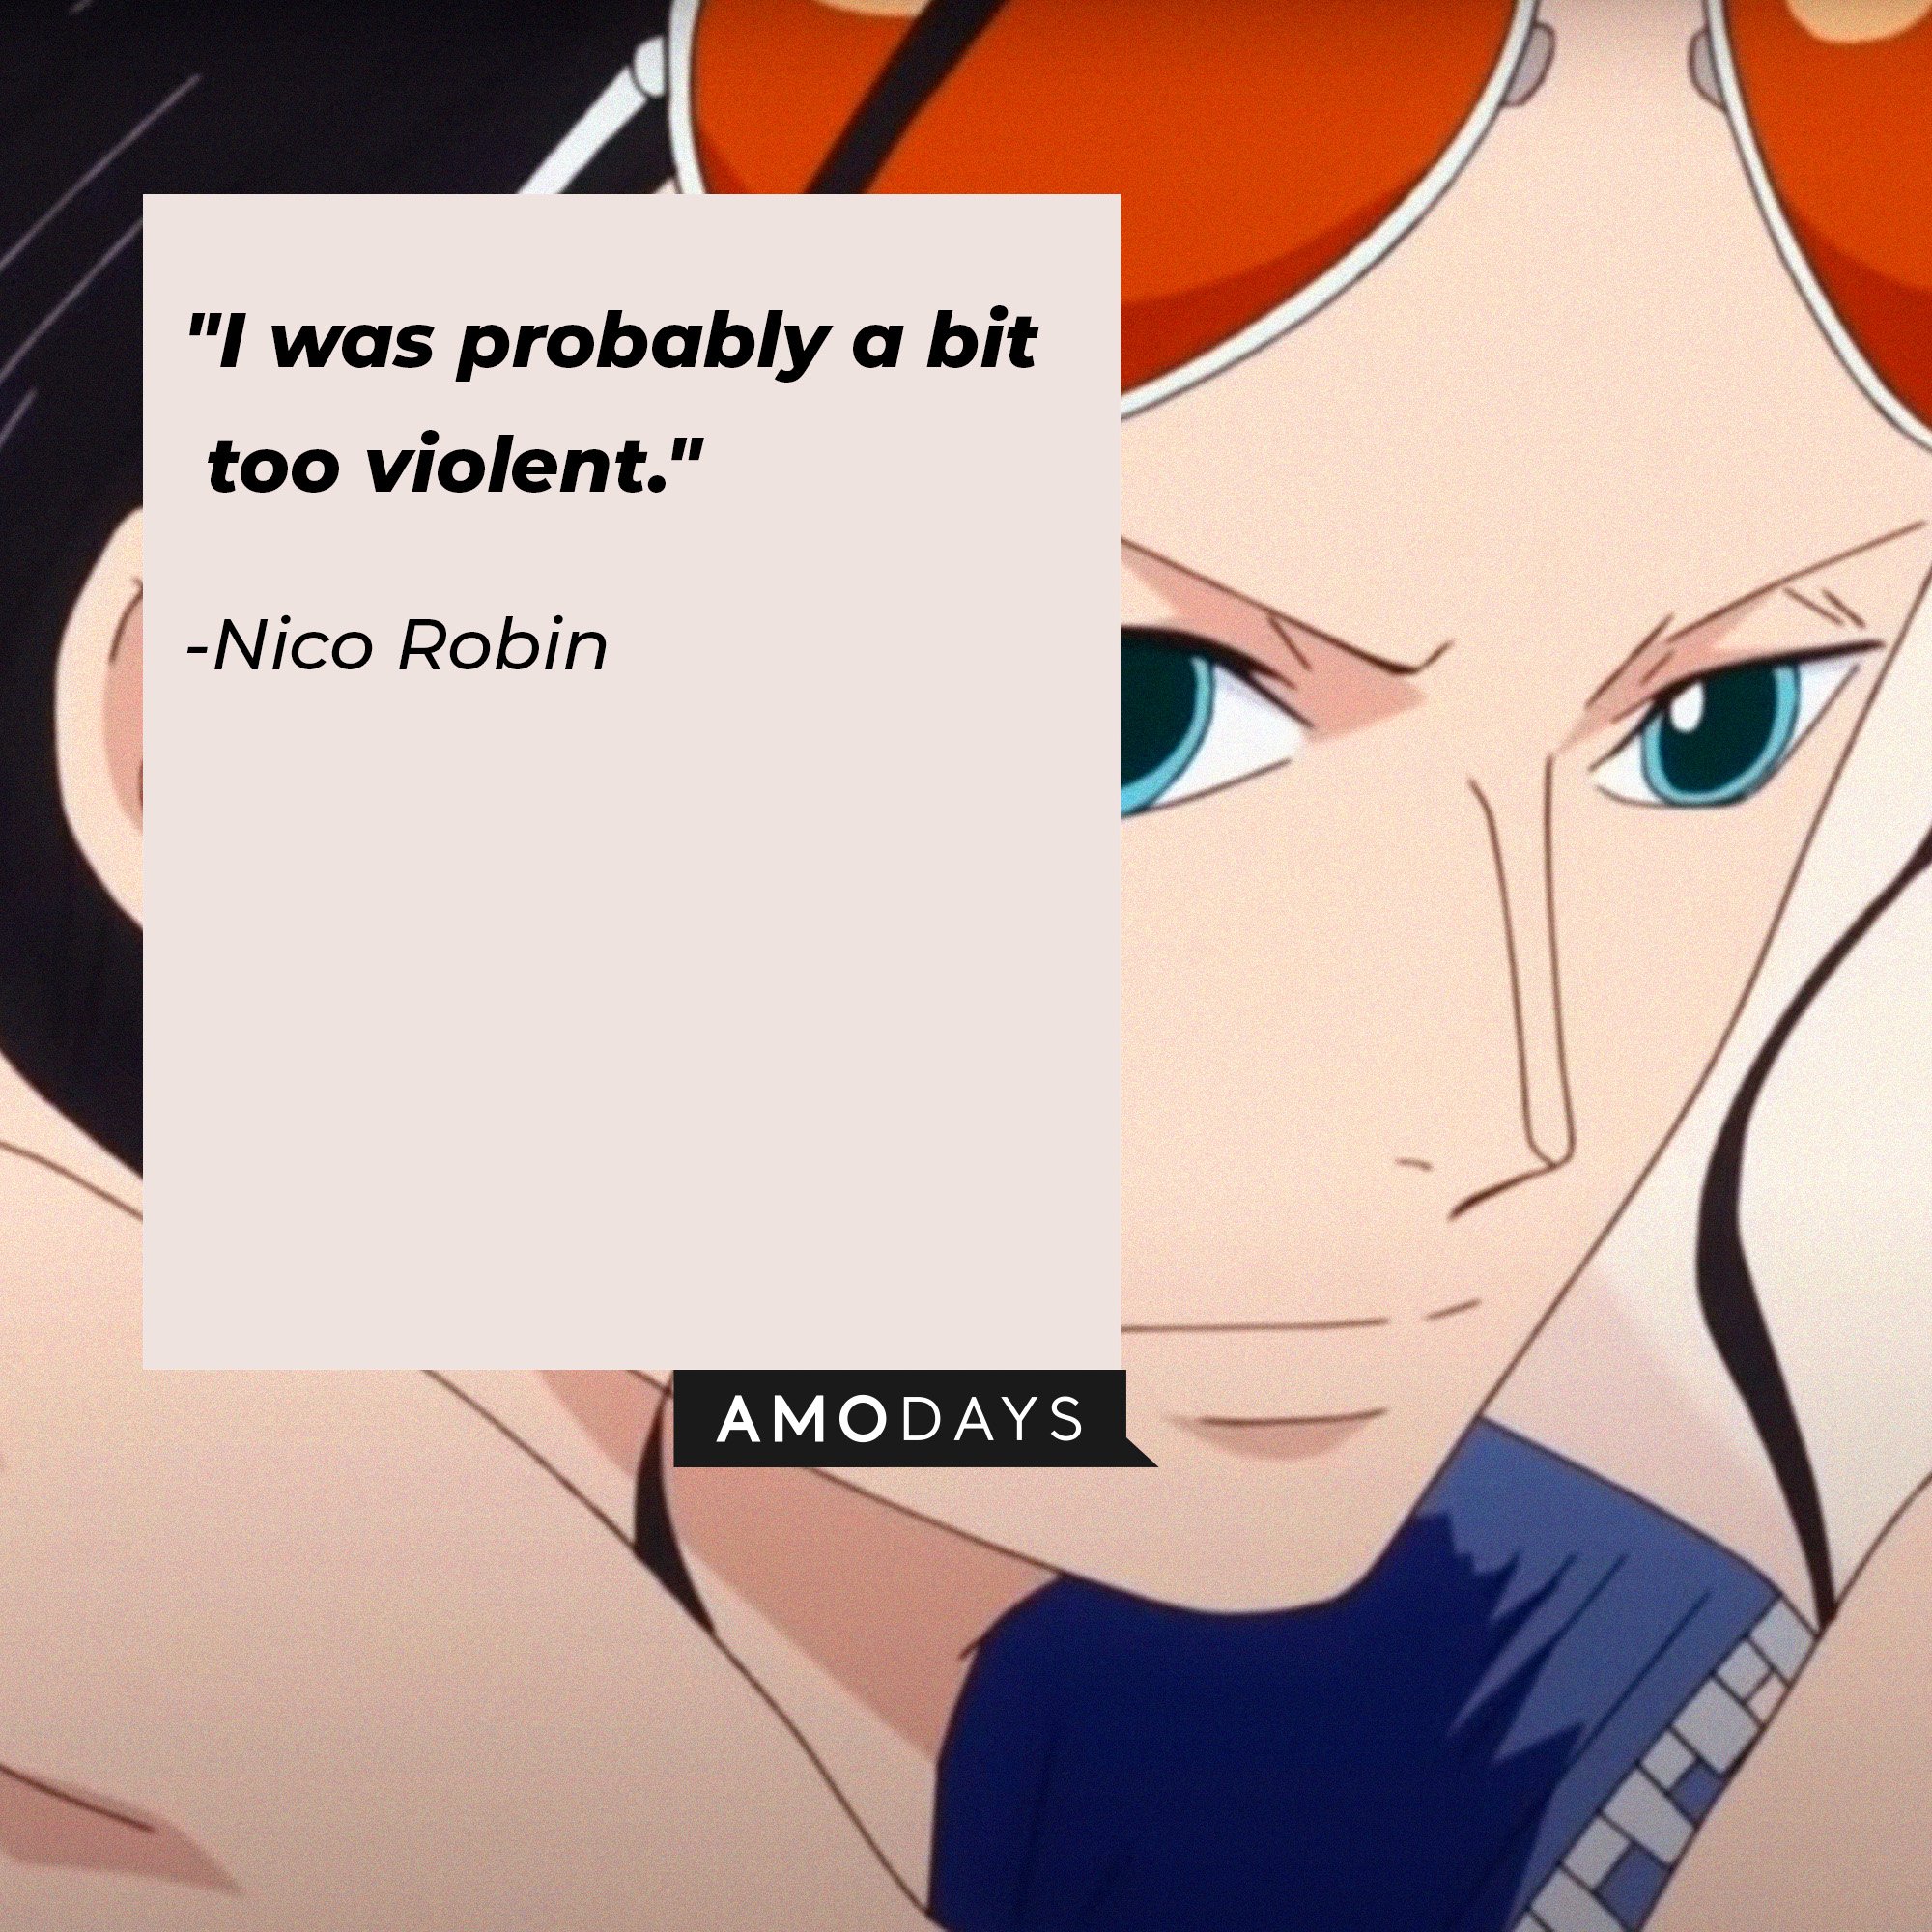 Nico Robin's quote: "I was probably a bit too violent." | Image: AmoDays